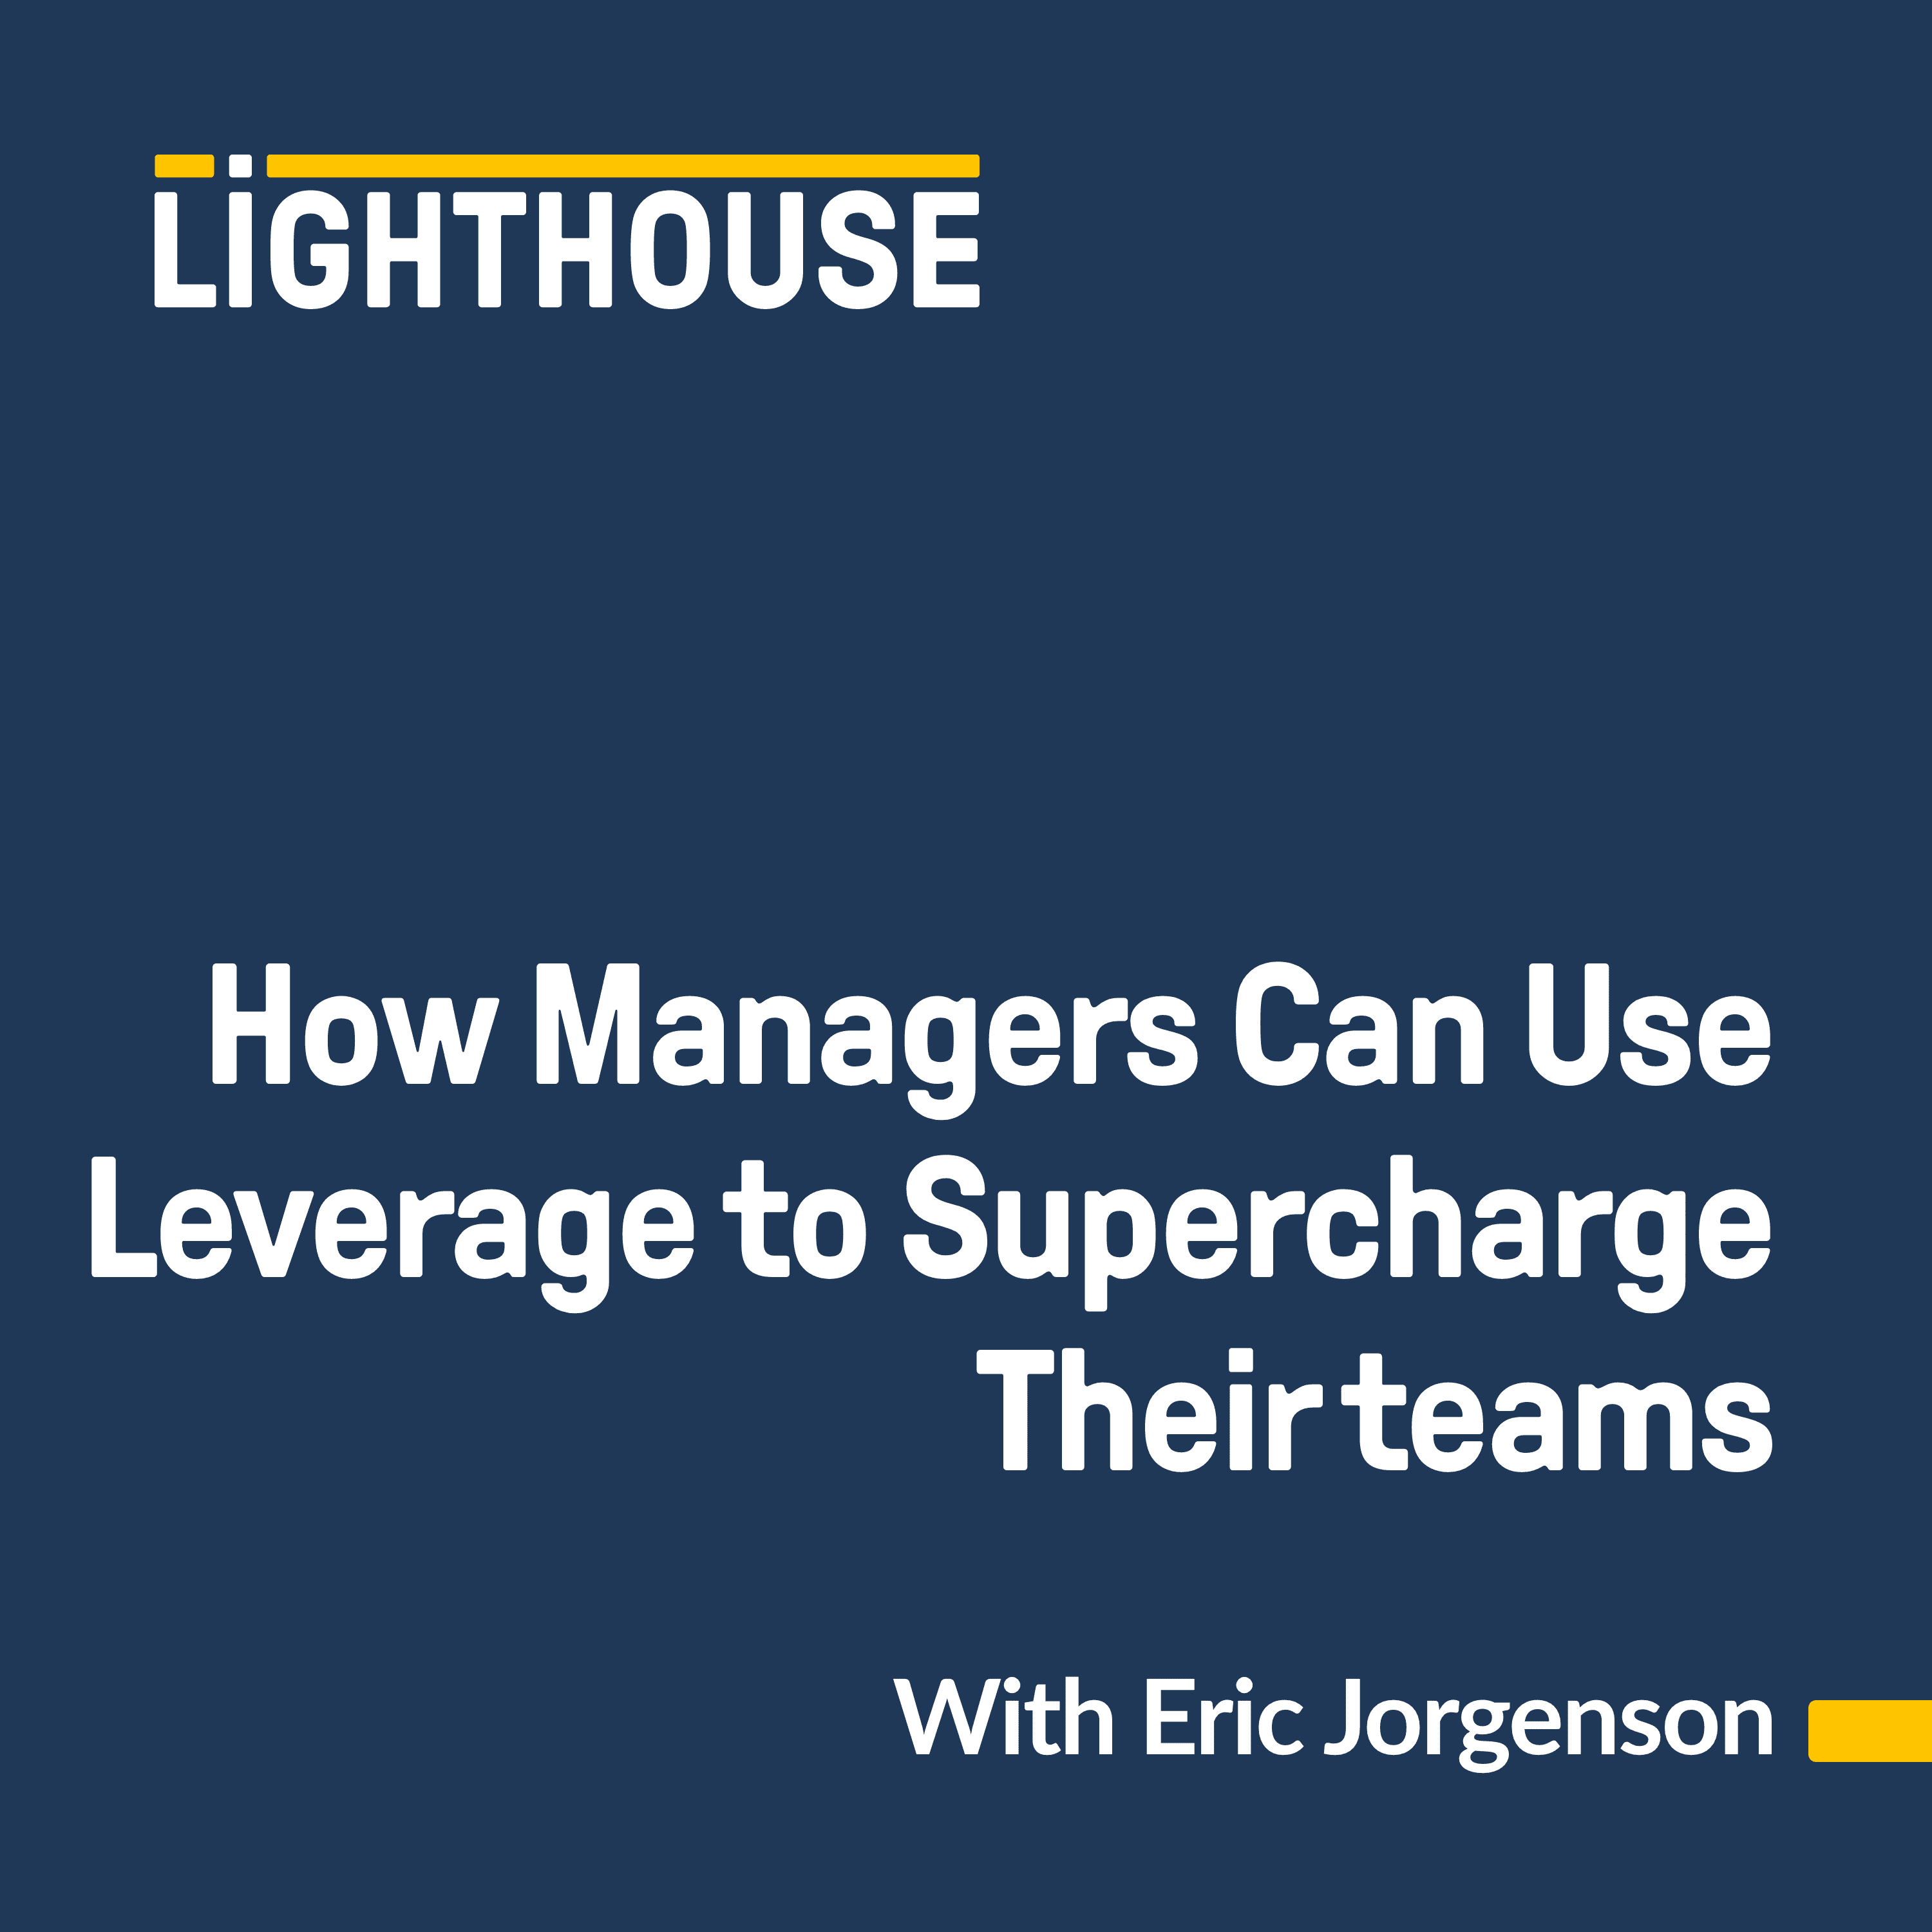 How Managers Can Use Leverage